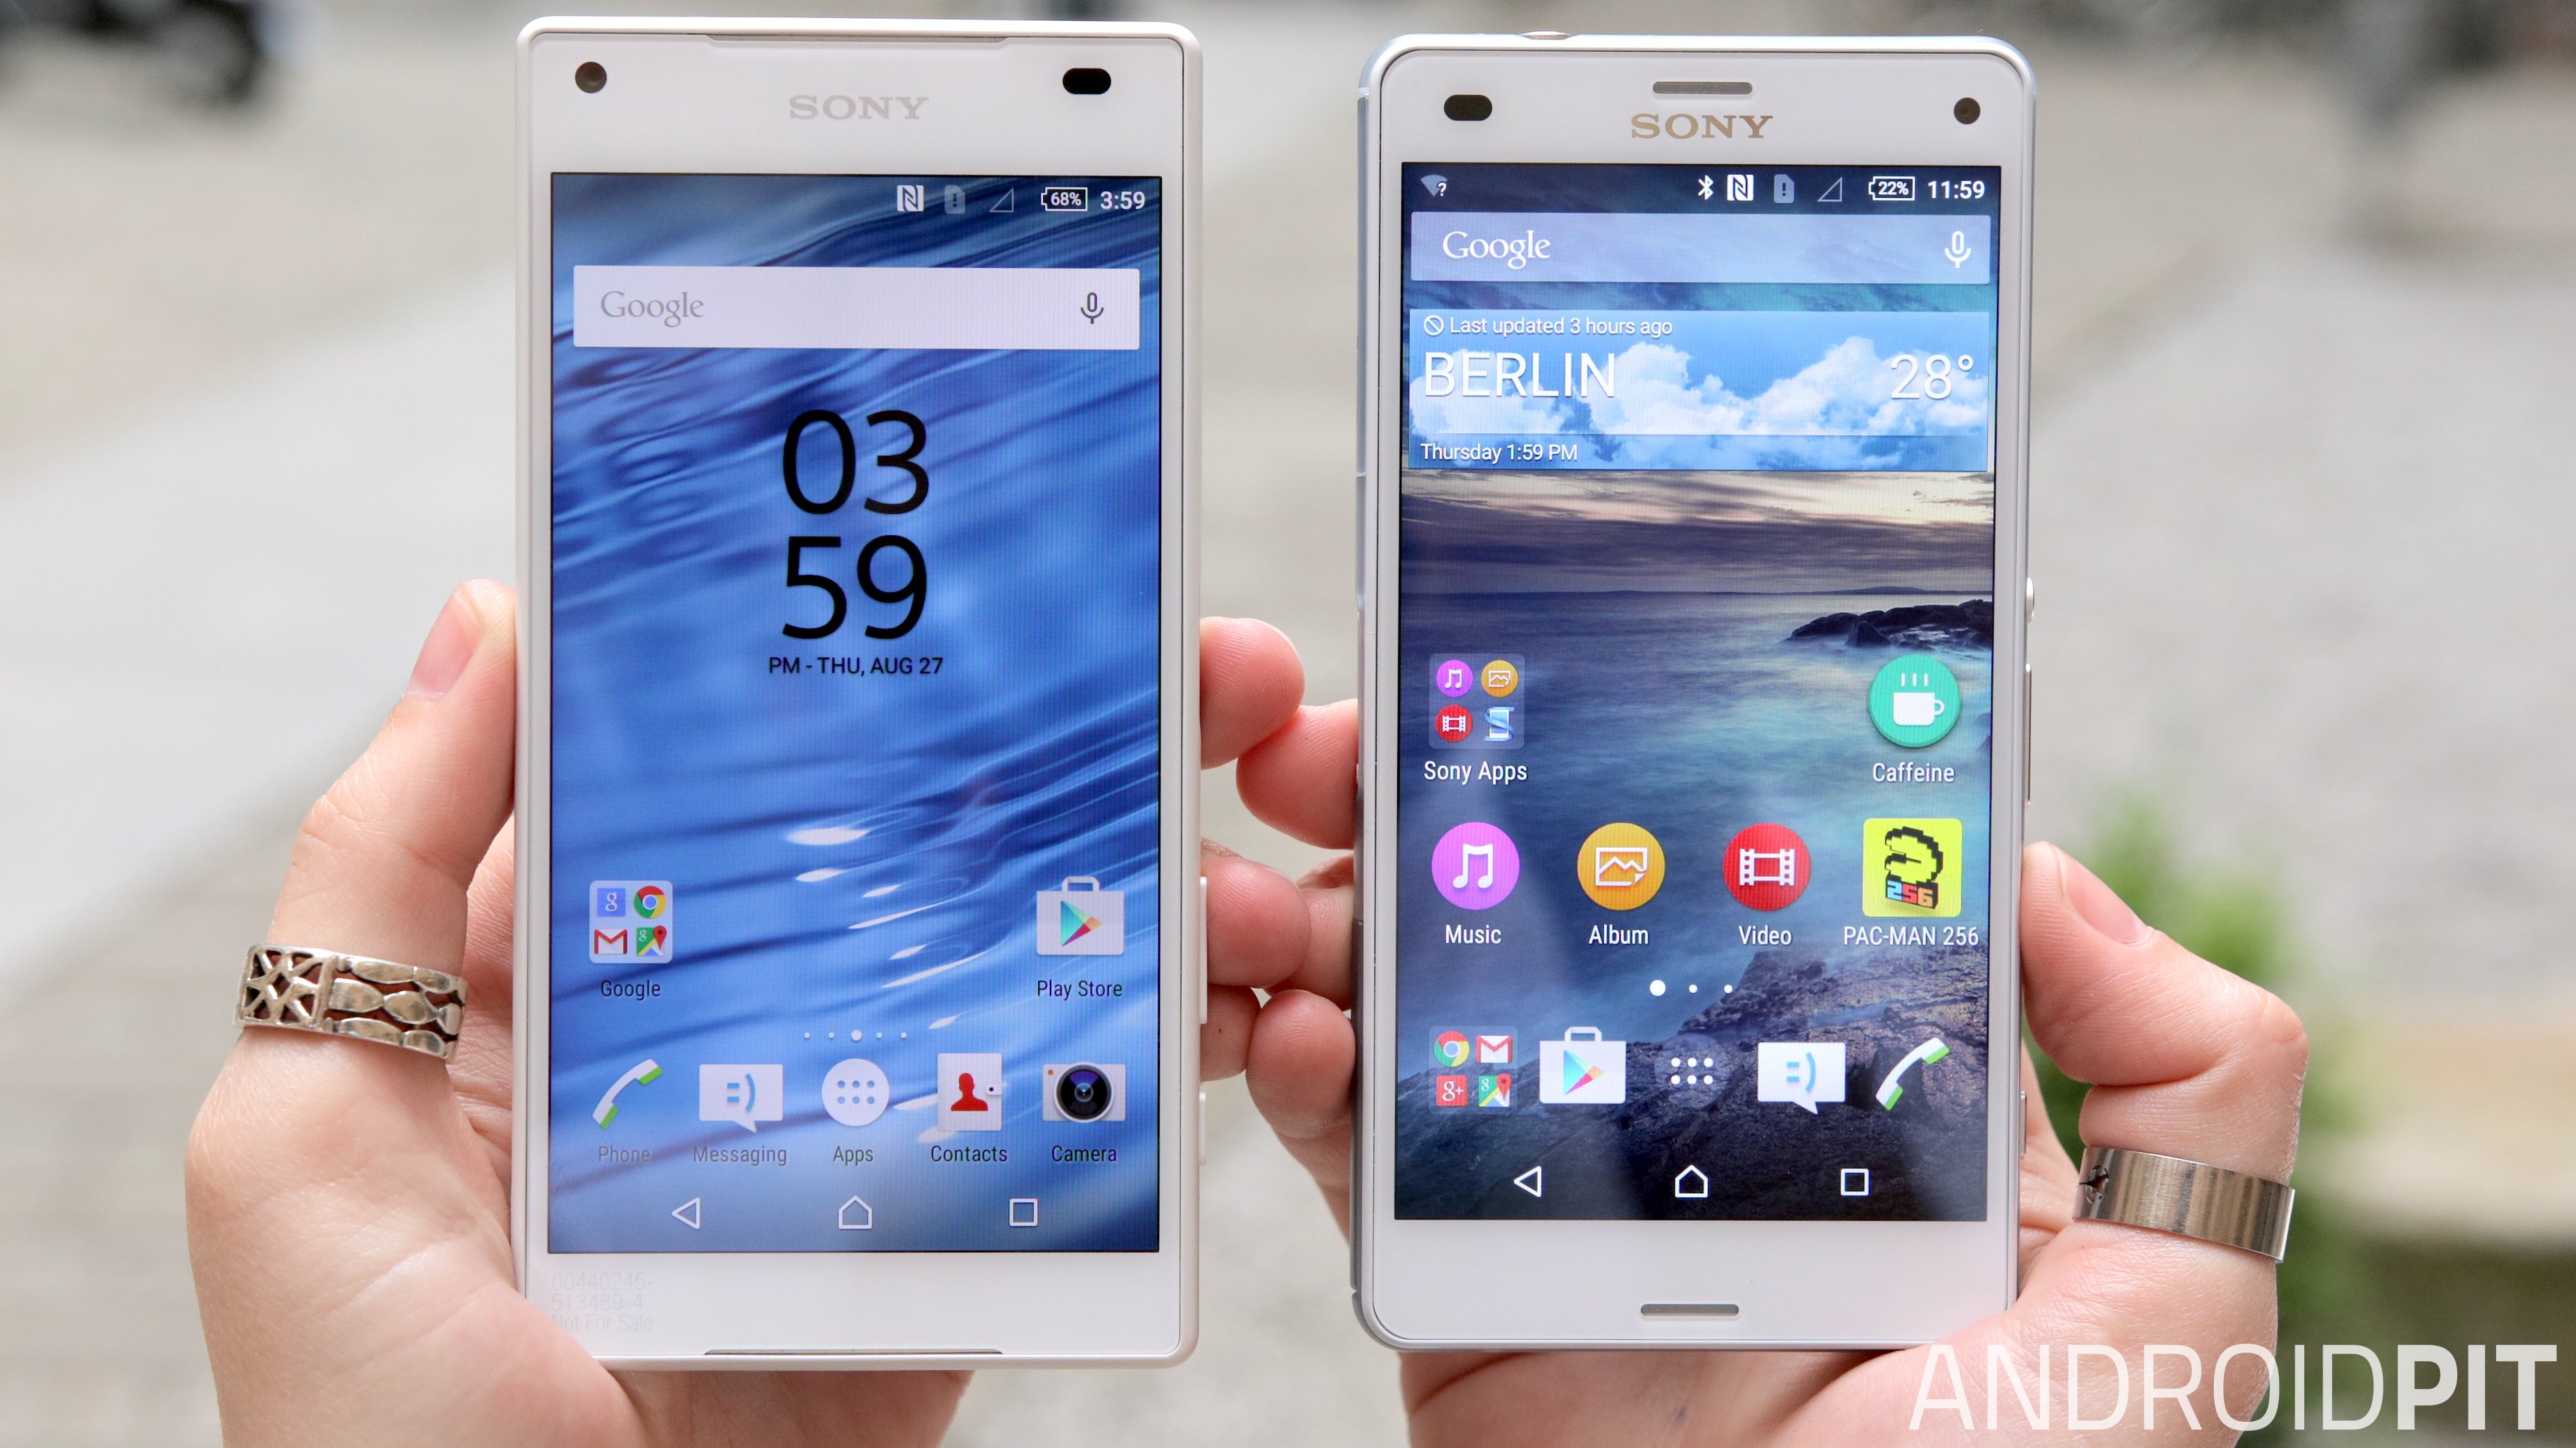 Sony Xperia Z5 Premium And Compact Are They Really Worth The